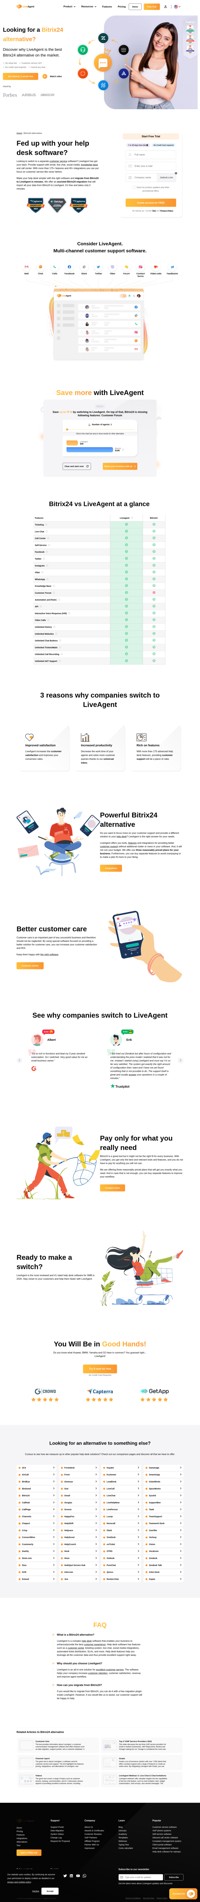 Liveagent is more cost-effective when compared to other help desk solutions. Liveagent offers tools, features and integrations for better customer support. With more than 175+ help desk features, providing support will be a piece of cake.